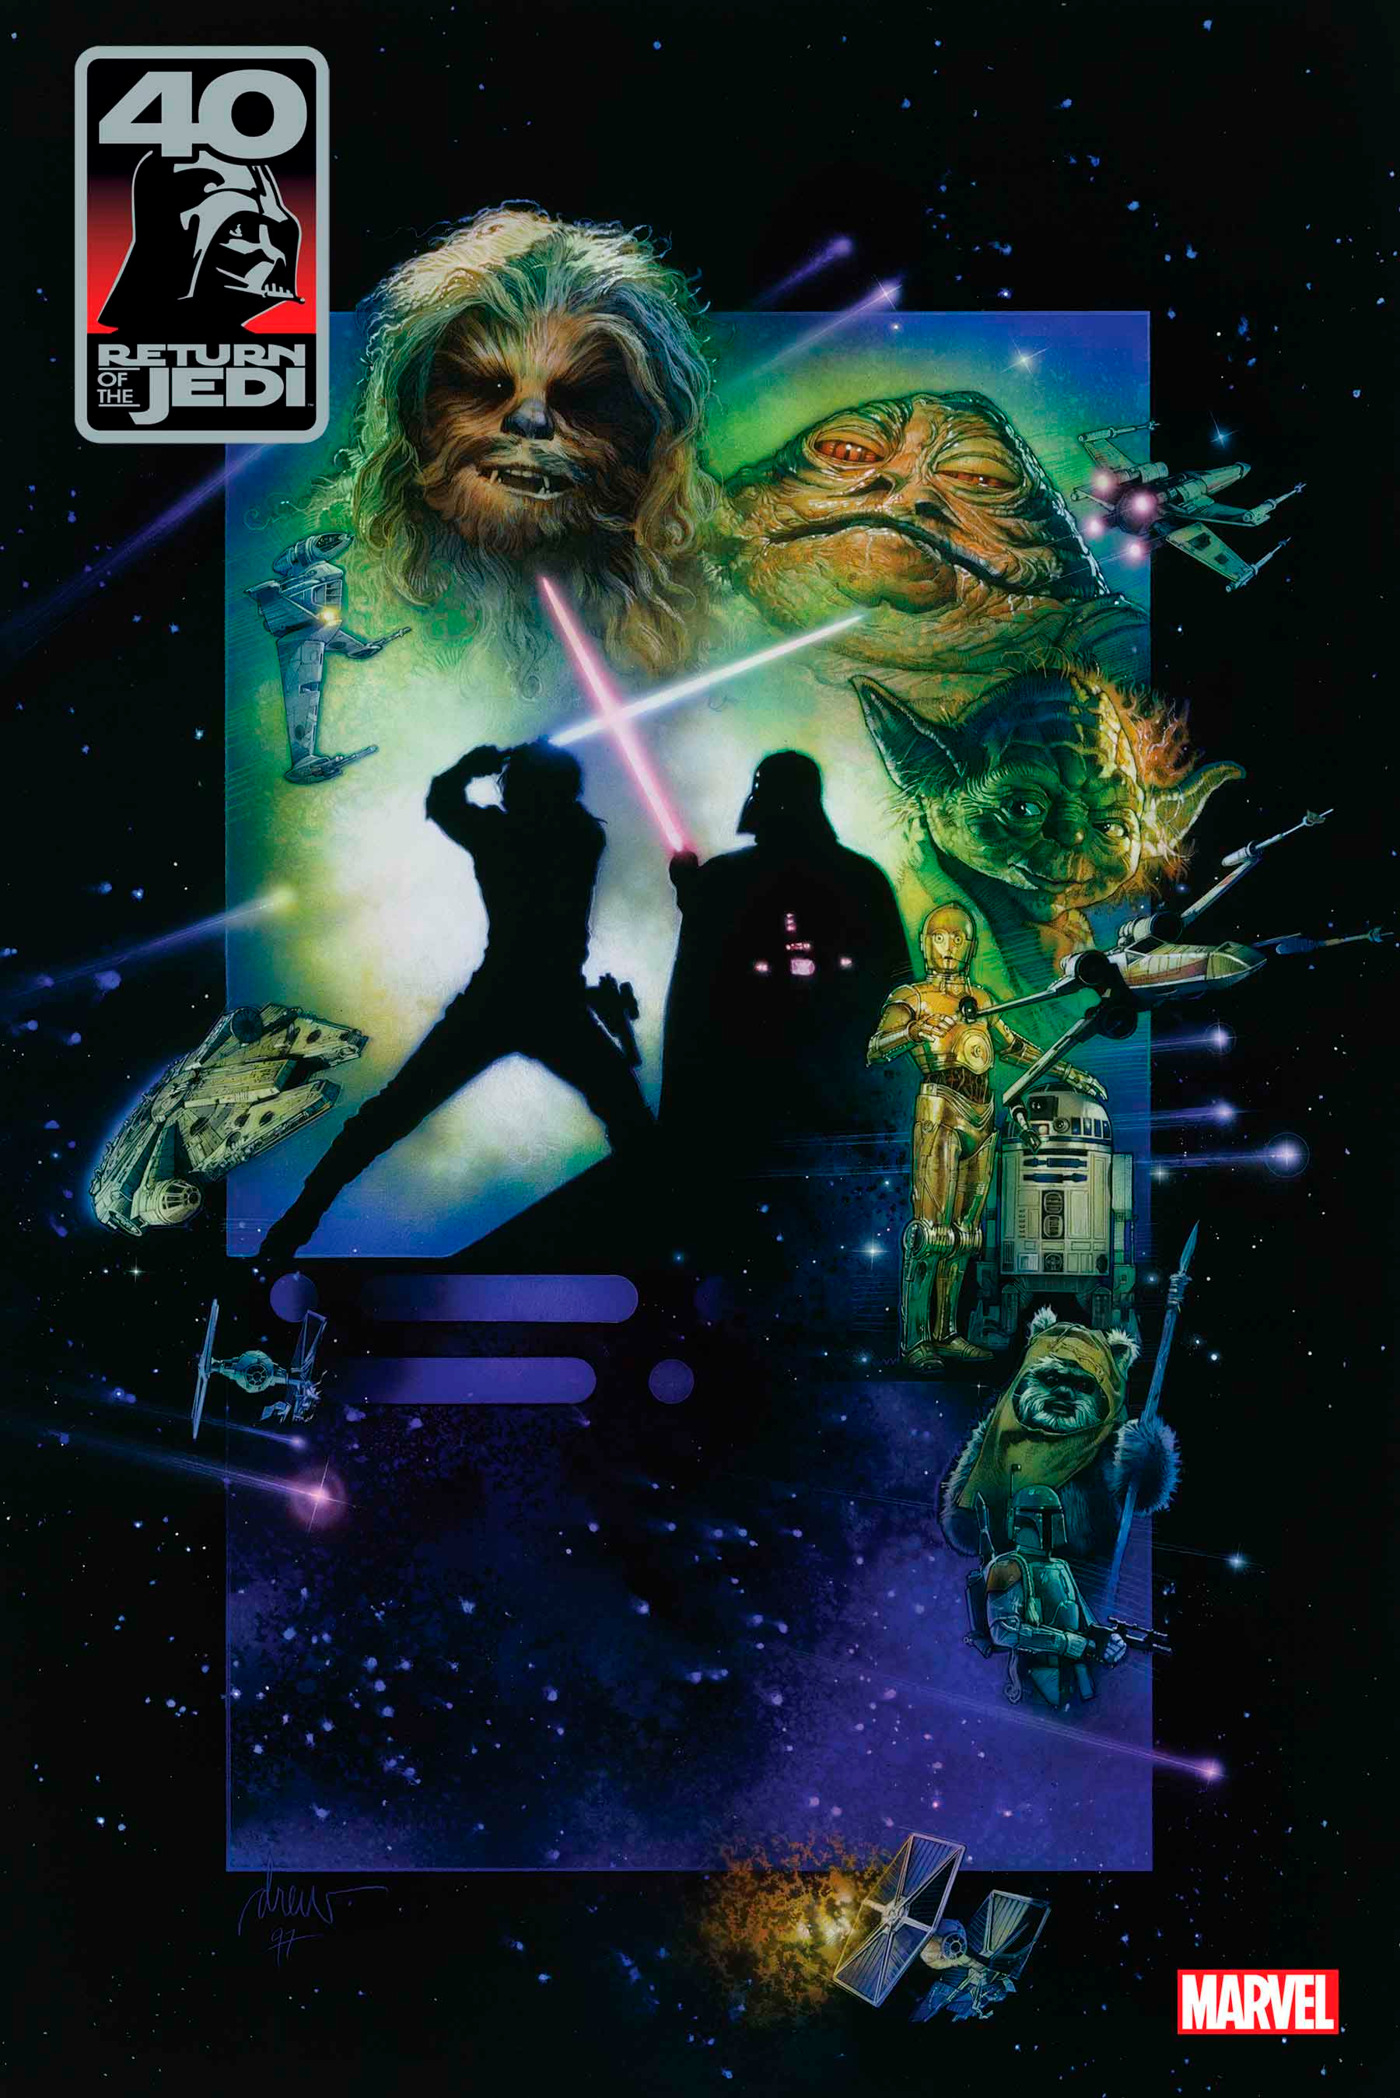 Star Wars: Return of the Jedi - The #40th Anniversary Covers by Chris Sprouse 1 Movie Poster Variant